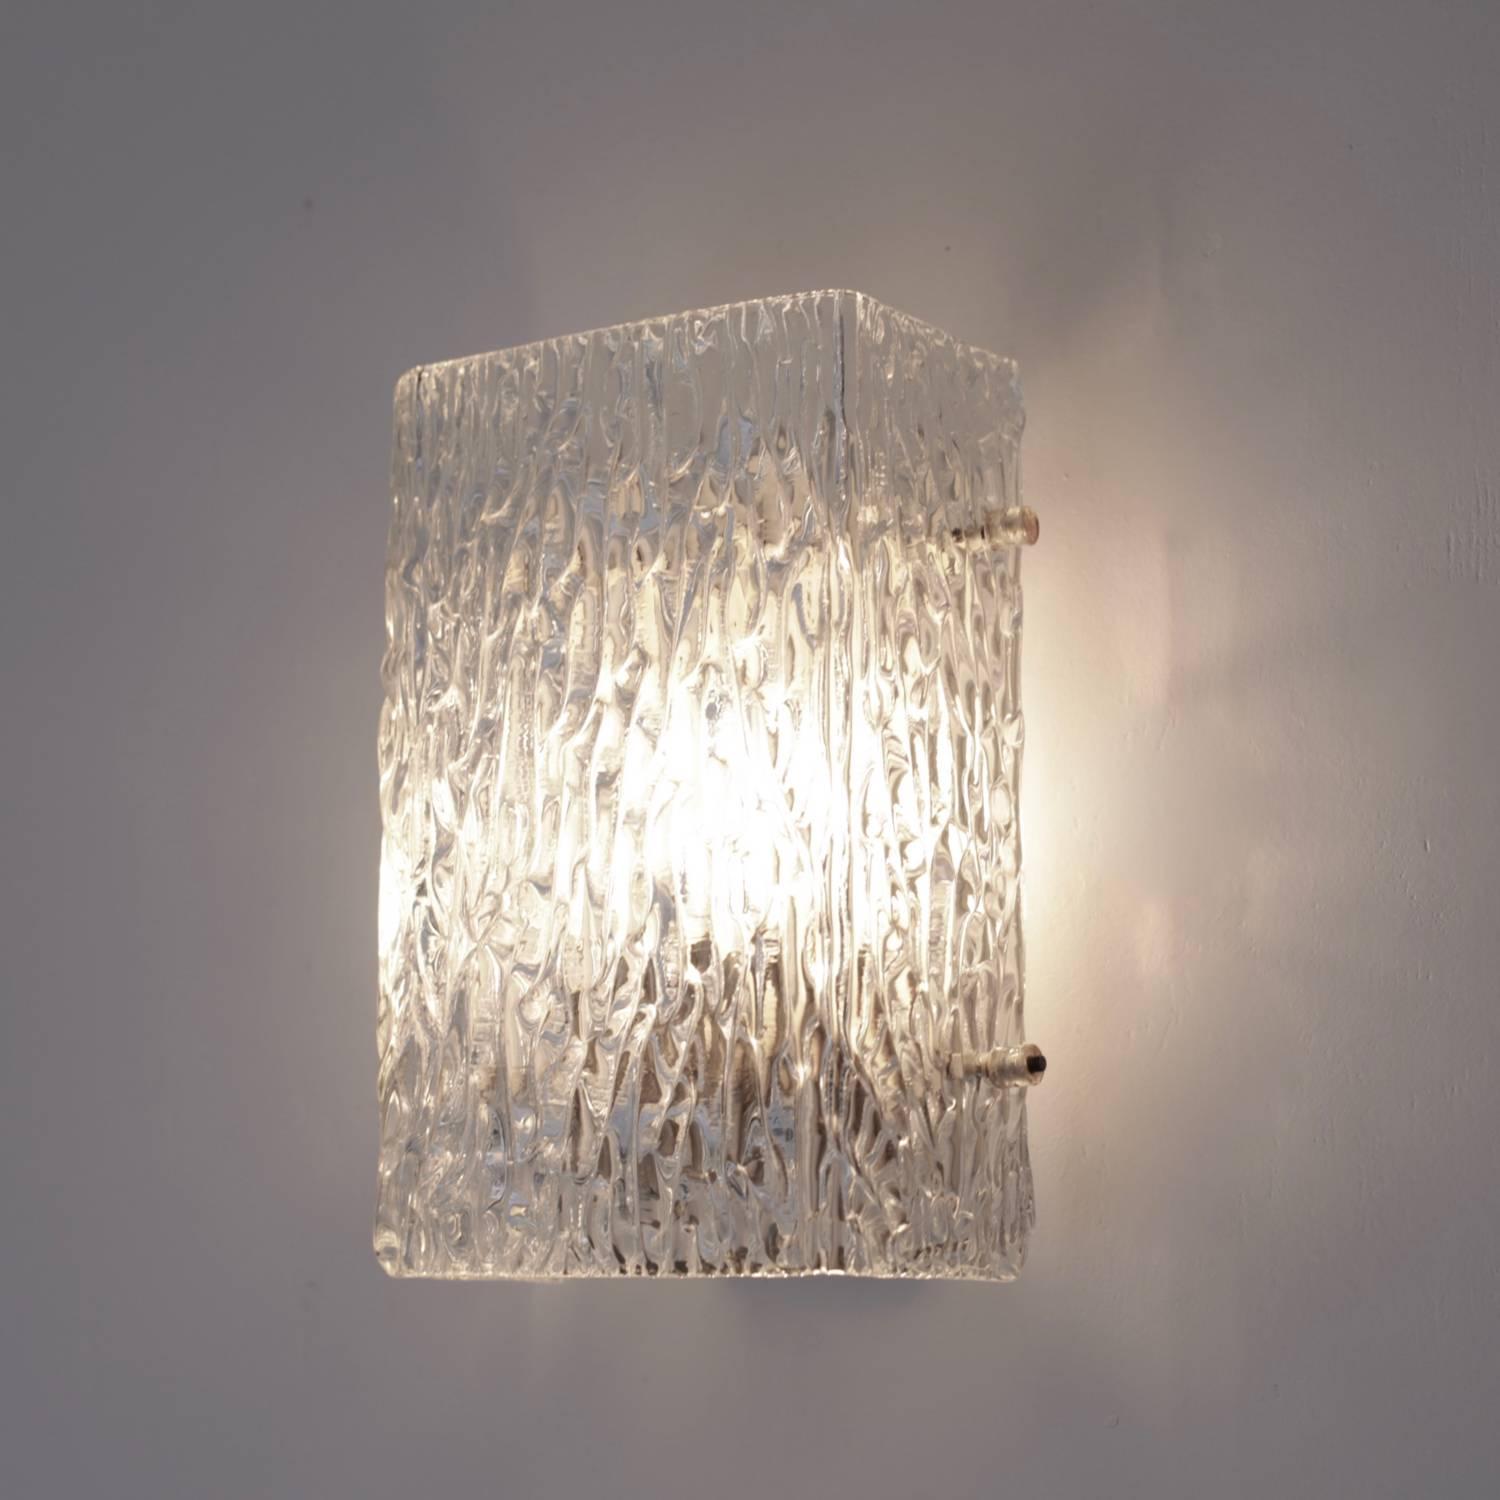 Beautiful glass sconces or wall lights from the 1960s produced by the high end glass manufacturer Kalmar. The thick textured glass creates a wonderful light effect. The sconces are in excellent condition and matching sconces in other size also